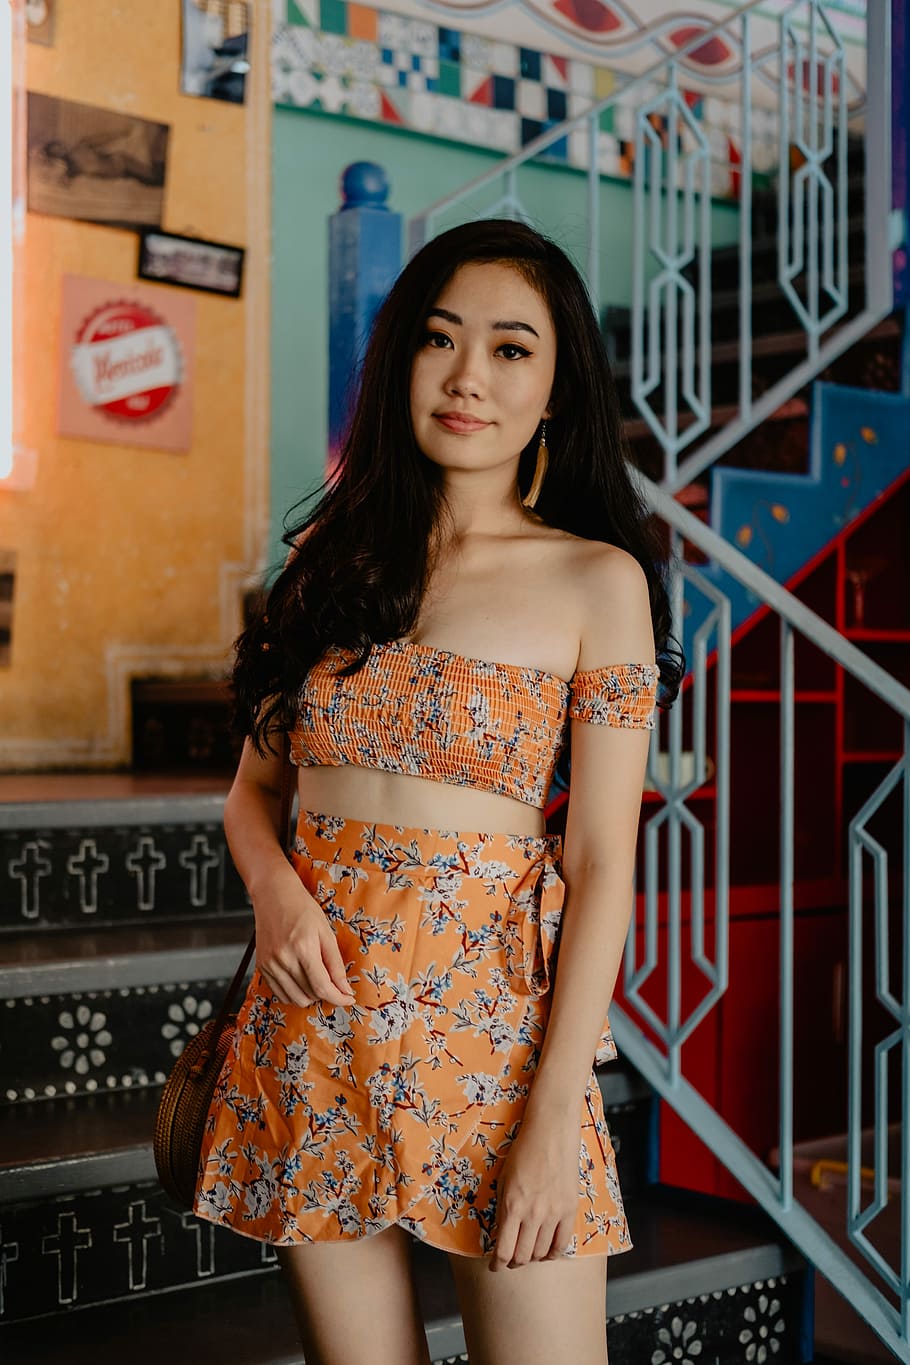 woman wearing orange crop top and skirt on the stairs, selective focus photography of woman wearing off-shoulder bustier top and rompers outfit standing at staircase, HD wallpaper